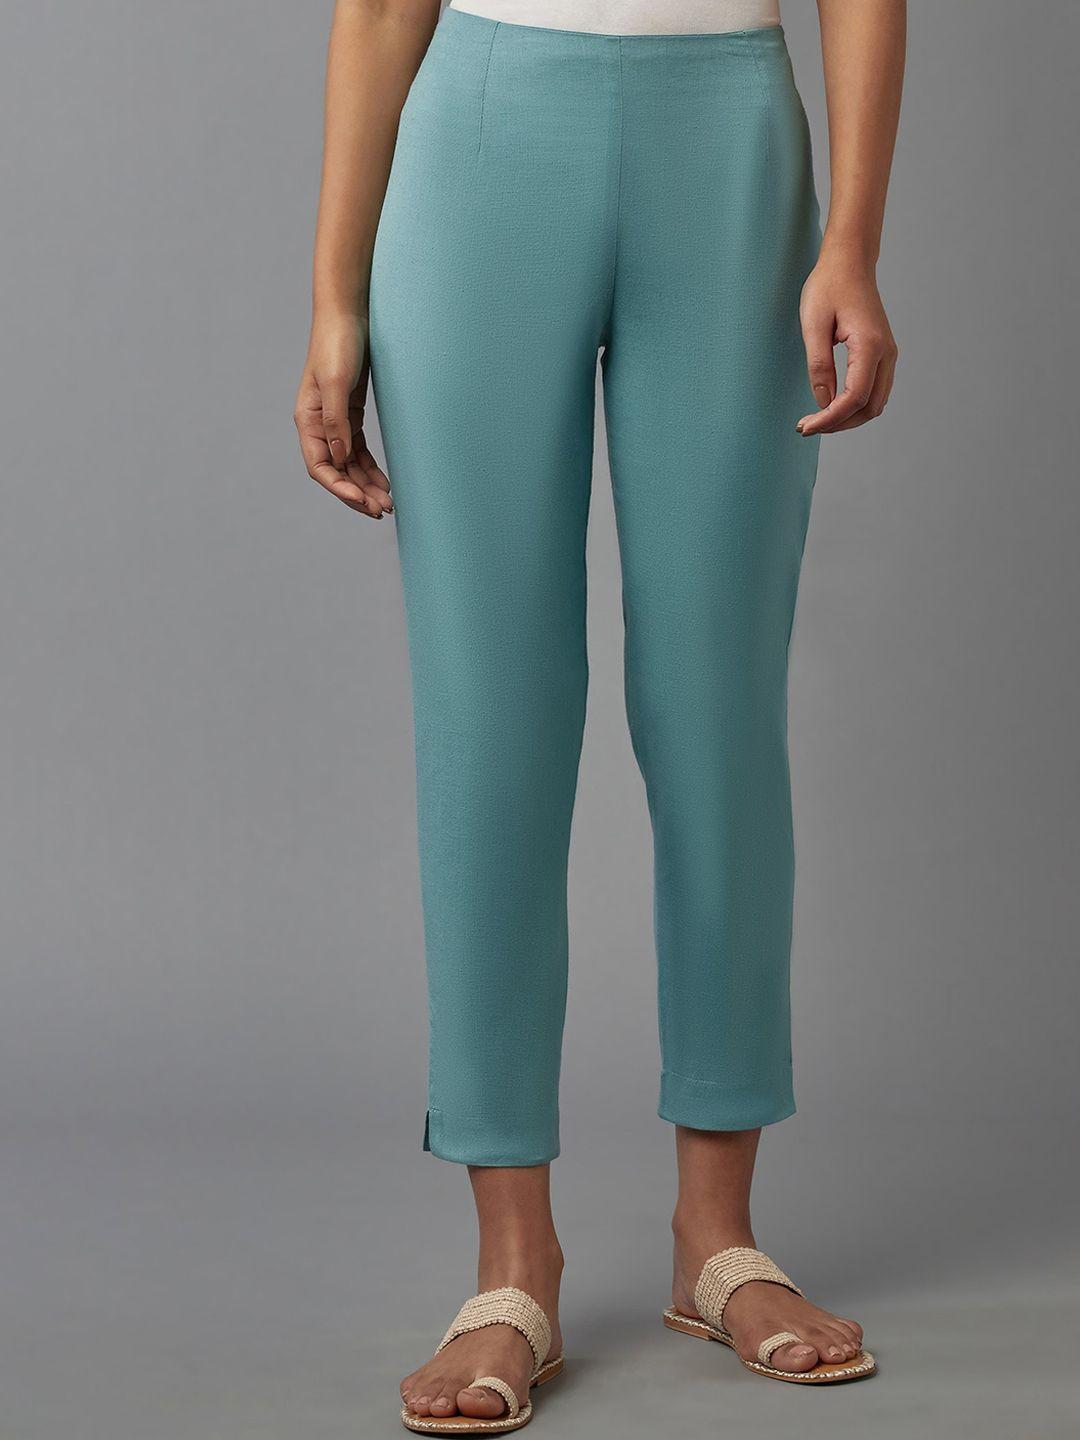 w women turquoise blue slim fit trousers